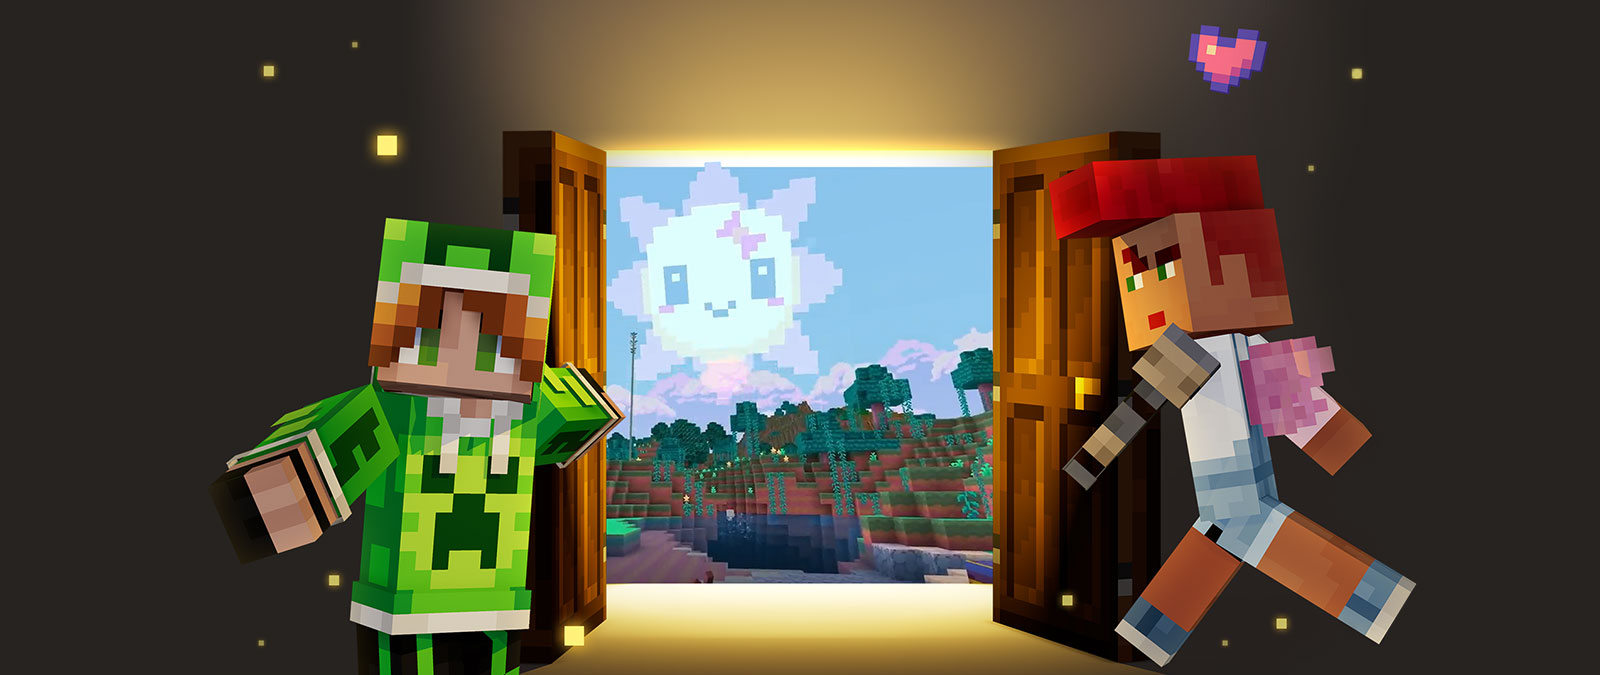 Two Minecraft characters welcome you through a door to the Minecraft world.